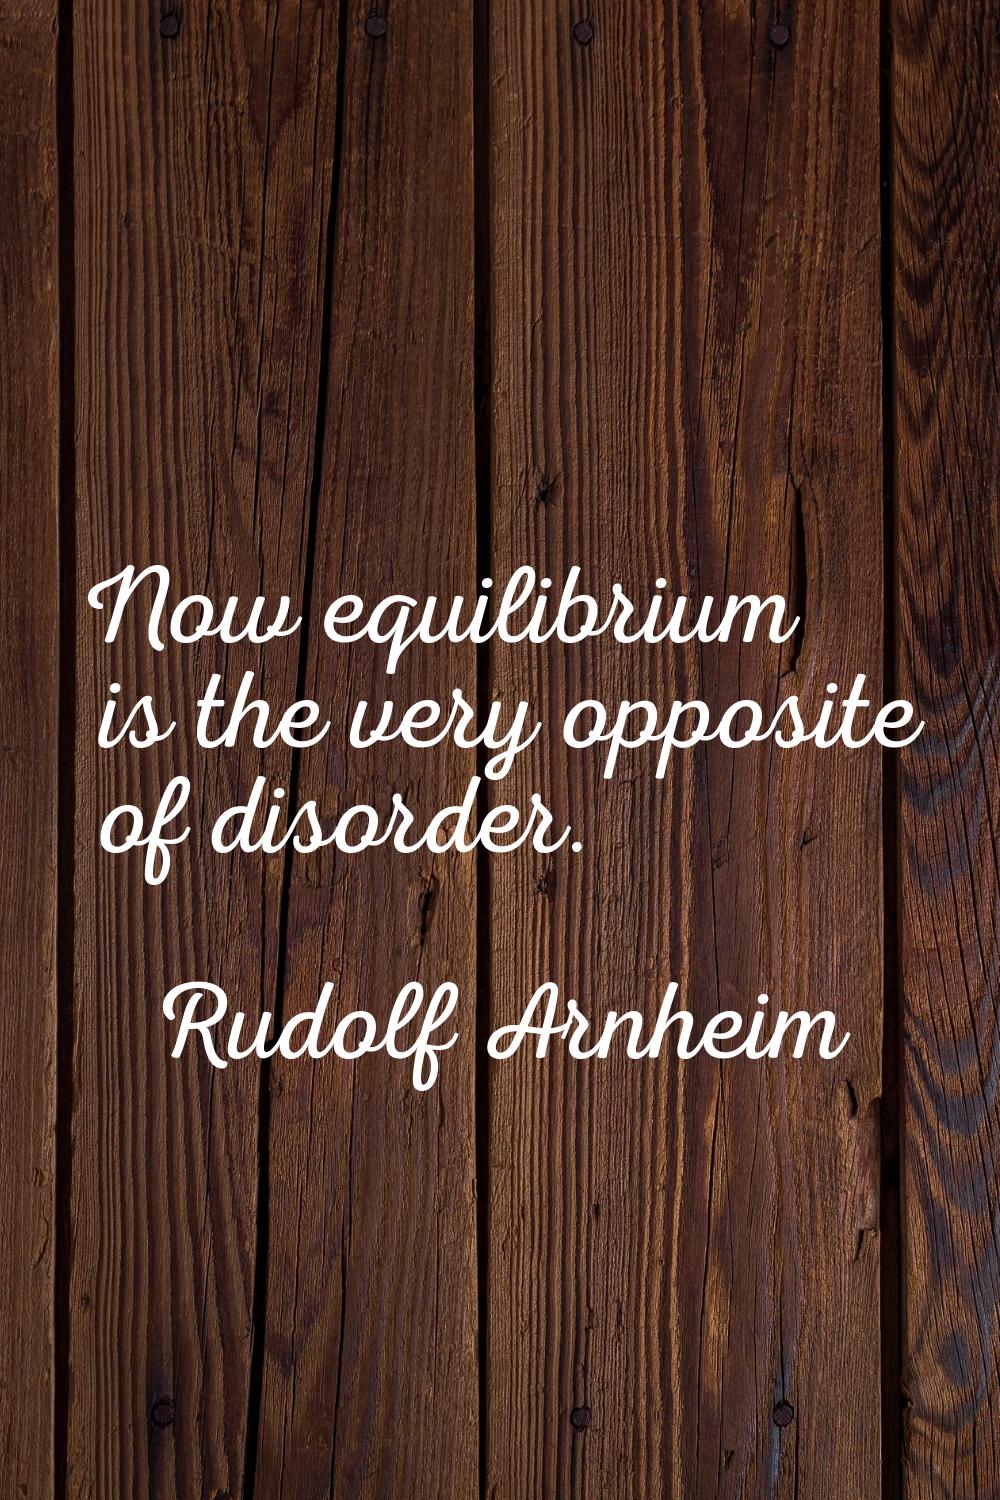 Now equilibrium is the very opposite of disorder.